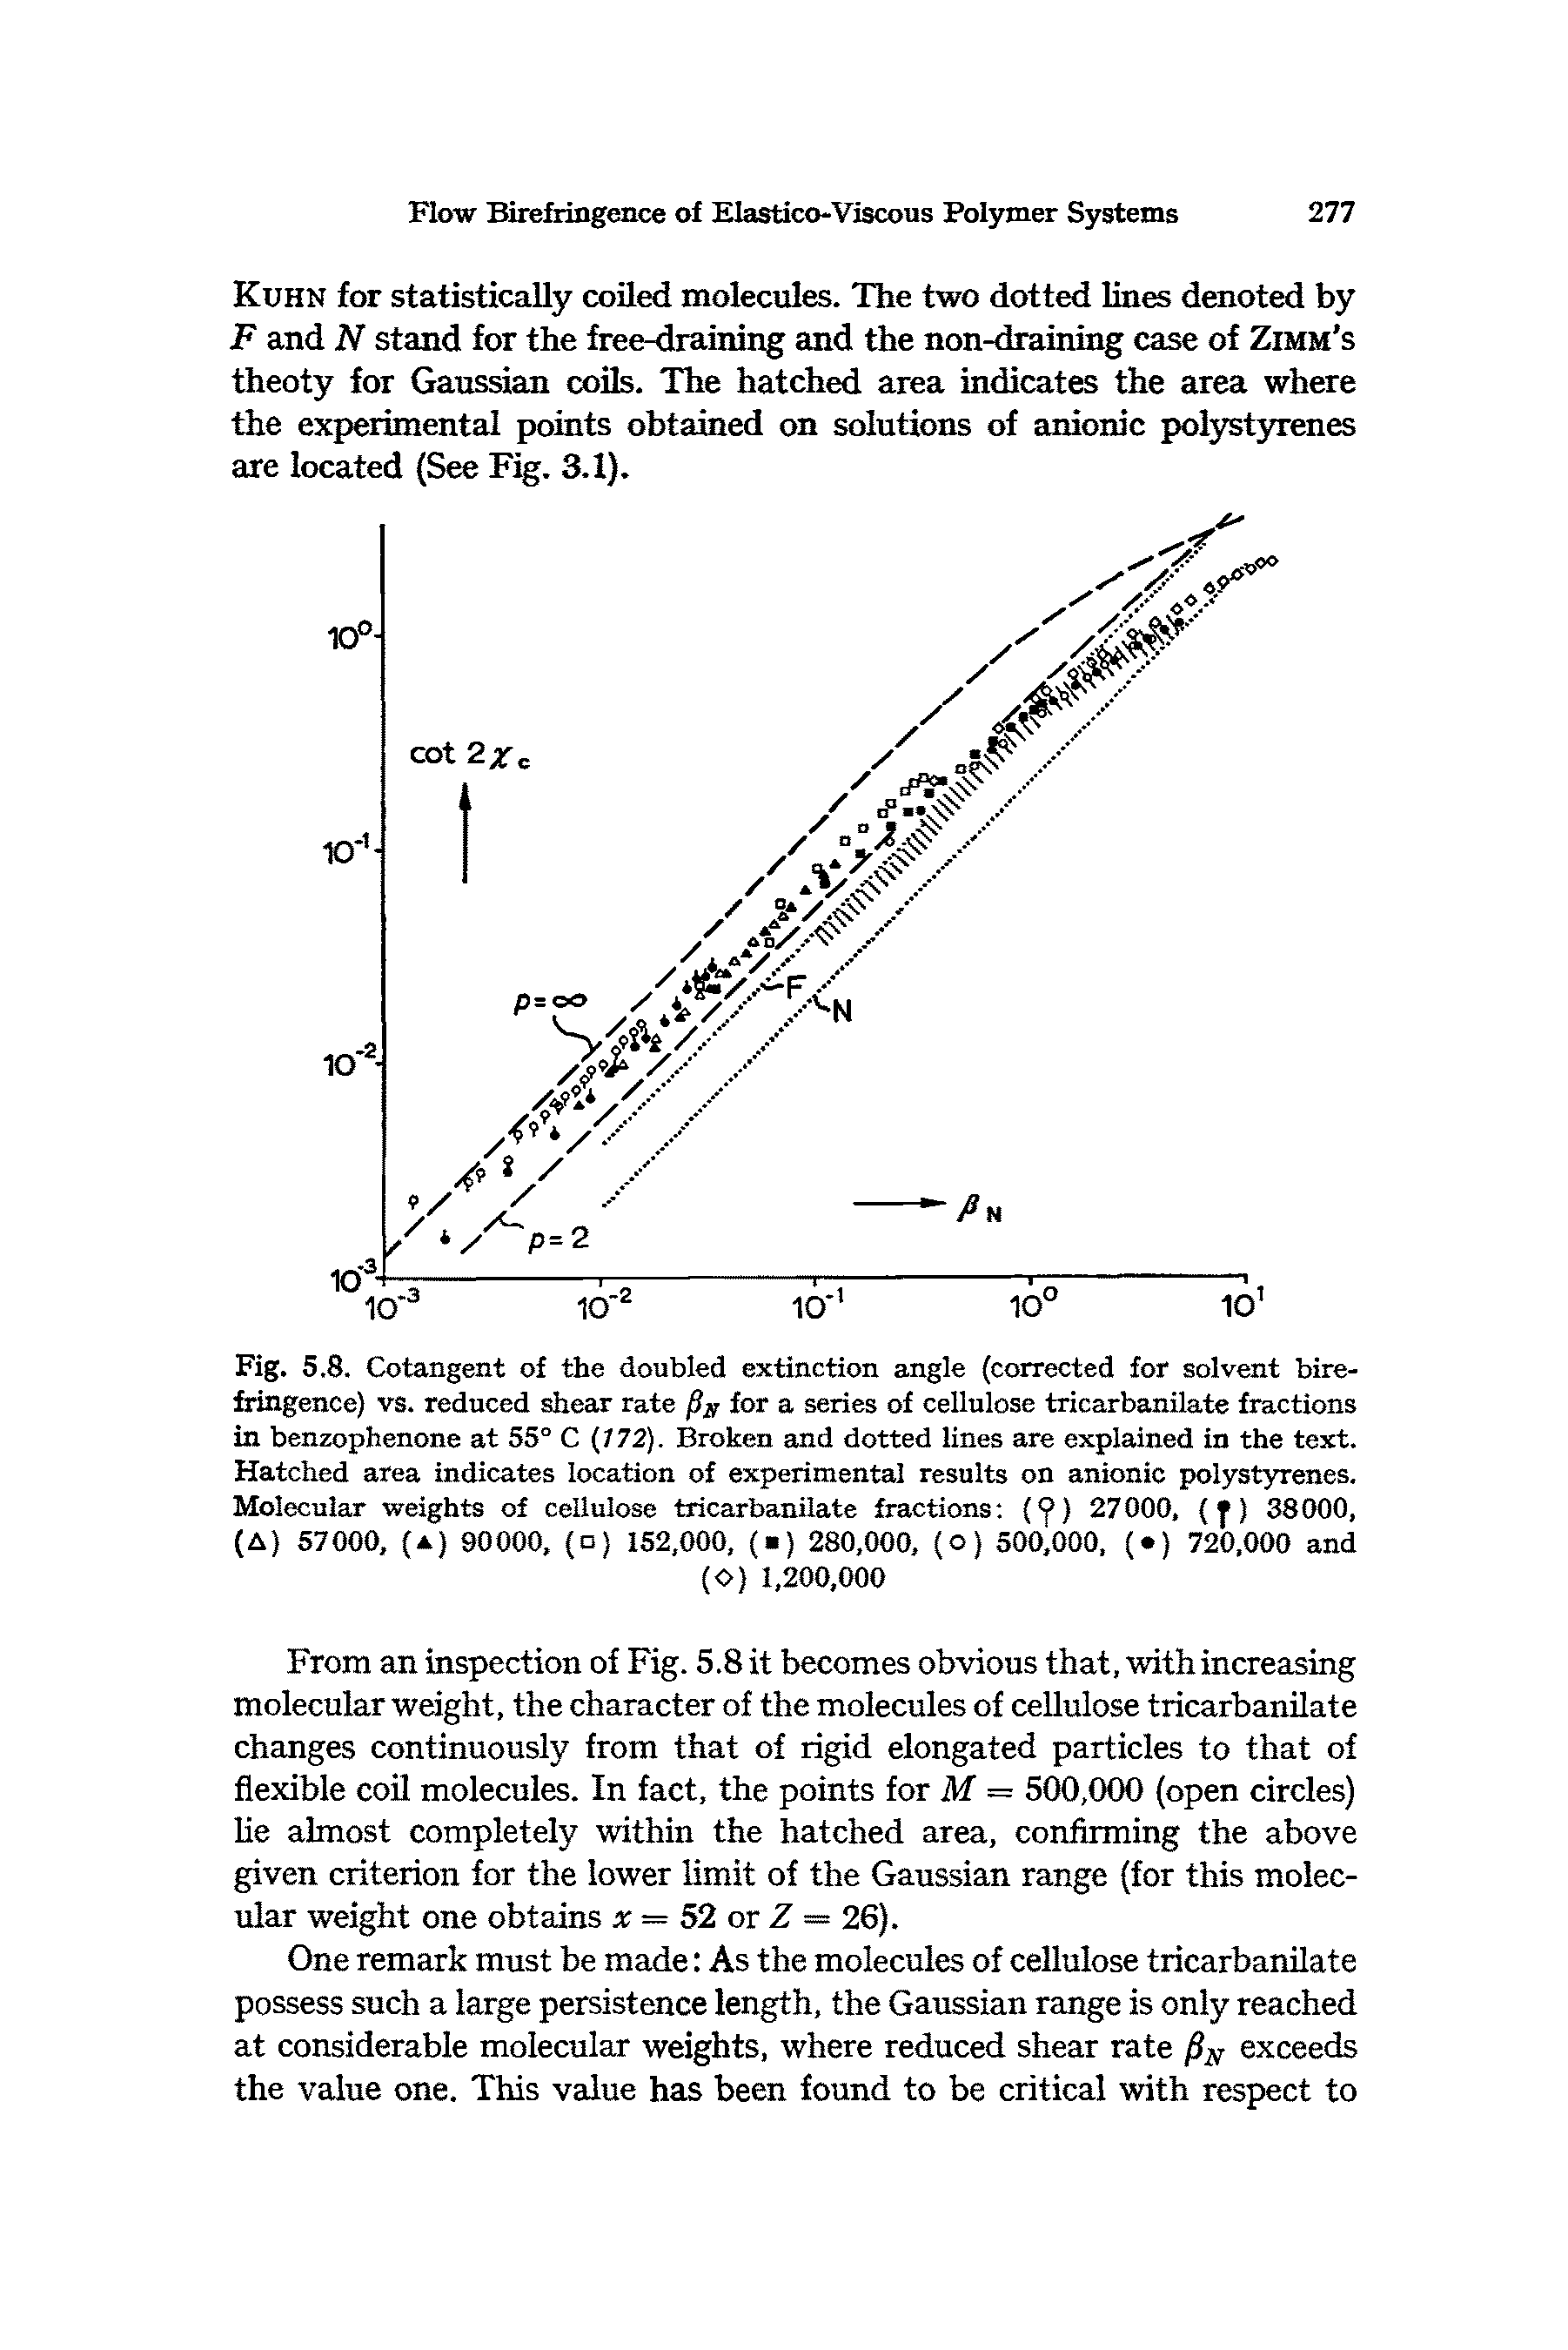 Fig. 5.8. Cotangent of the doubled extinction angle (corrected for solvent birefringence) vs. reduced shear rate f s for a series of cellulose tricarbanilate fractions in benzophenone at 55° C (772). Broken and dotted lines are explained in the text. Hatched area indicates location of experimental results on anionic polystyrenes. Molecular weights of cellulose tricarbanilate fractions (<j>) 27000, (f) 38000, (A) 57000, (a) 90000, (o) 152,000, ( ) 280,000, (o) 500,000, ( ) 720,000 and...